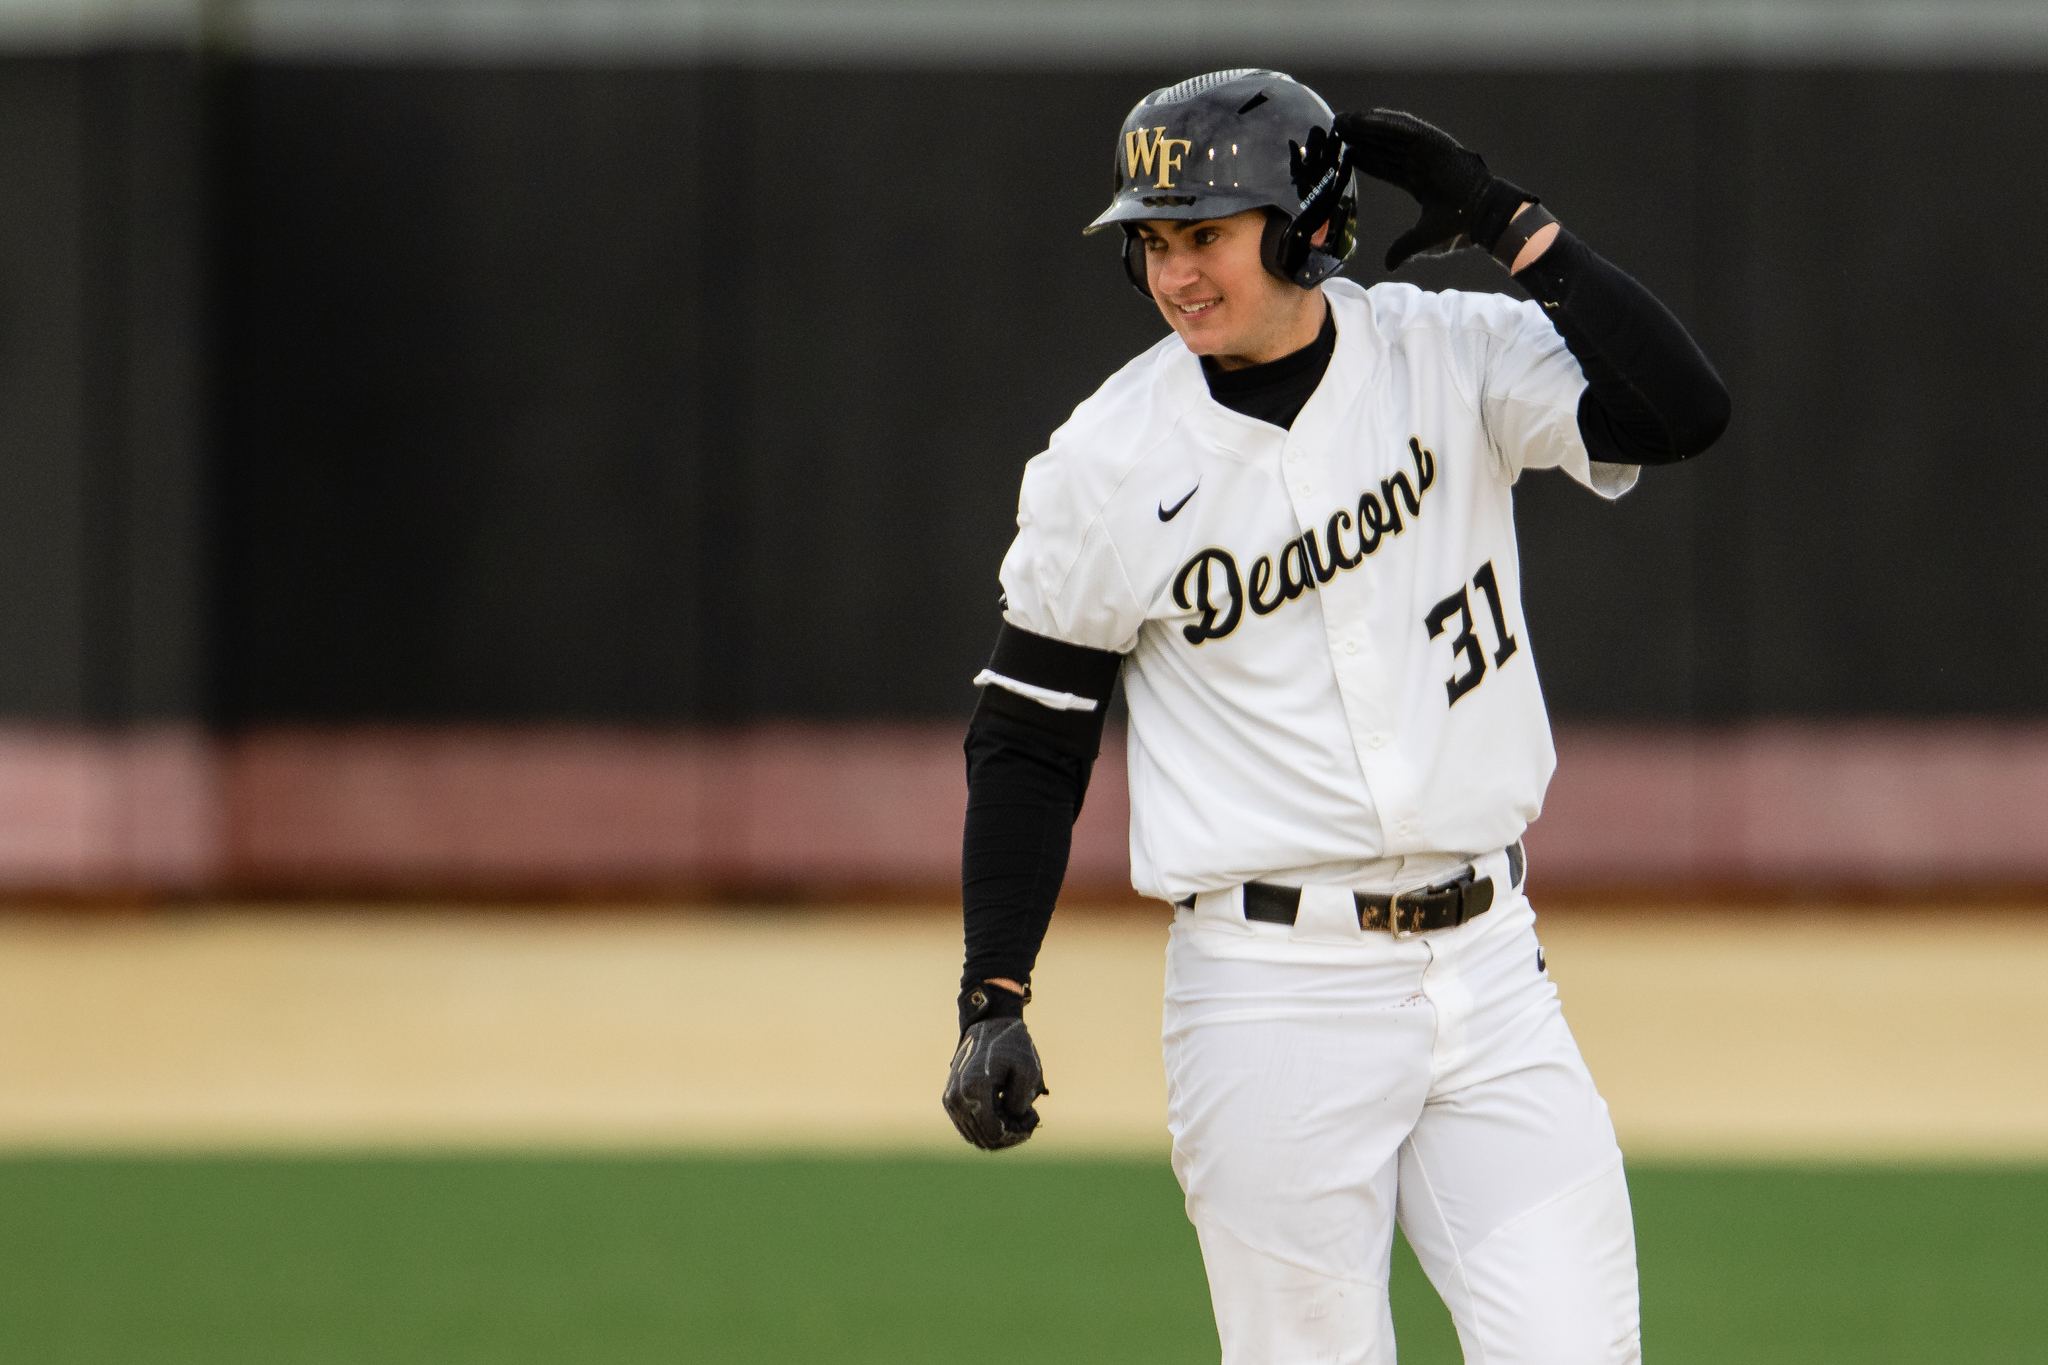 Jake Reinisch fulfilling his role with Wake Forest baseball